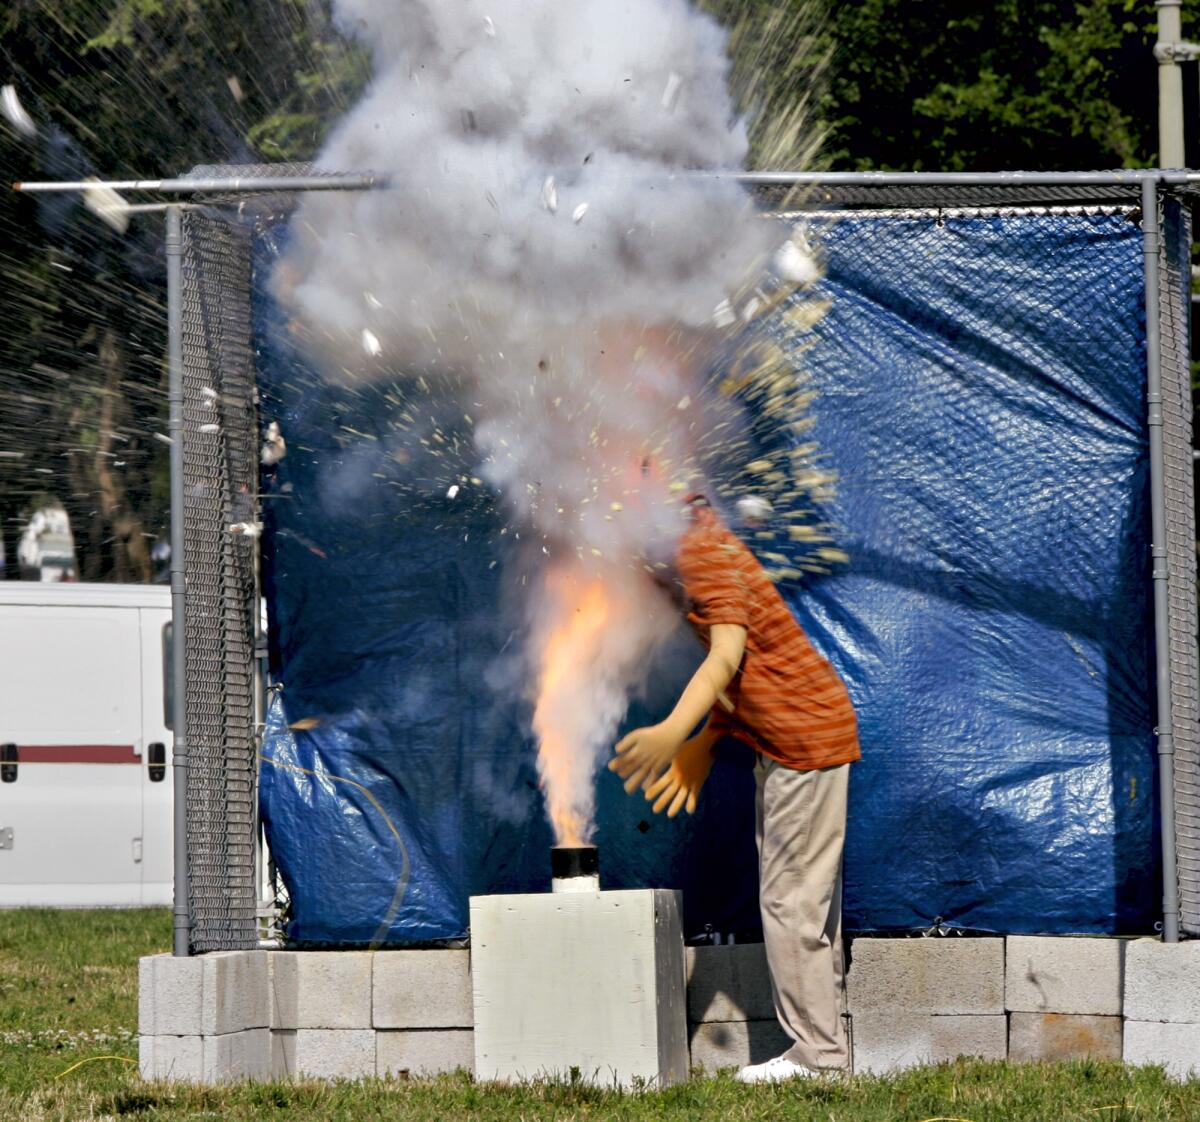 Flames shoot into a mannequin's head when fireworks ignite in a demonstration by the Consumer Products Safety Commission.